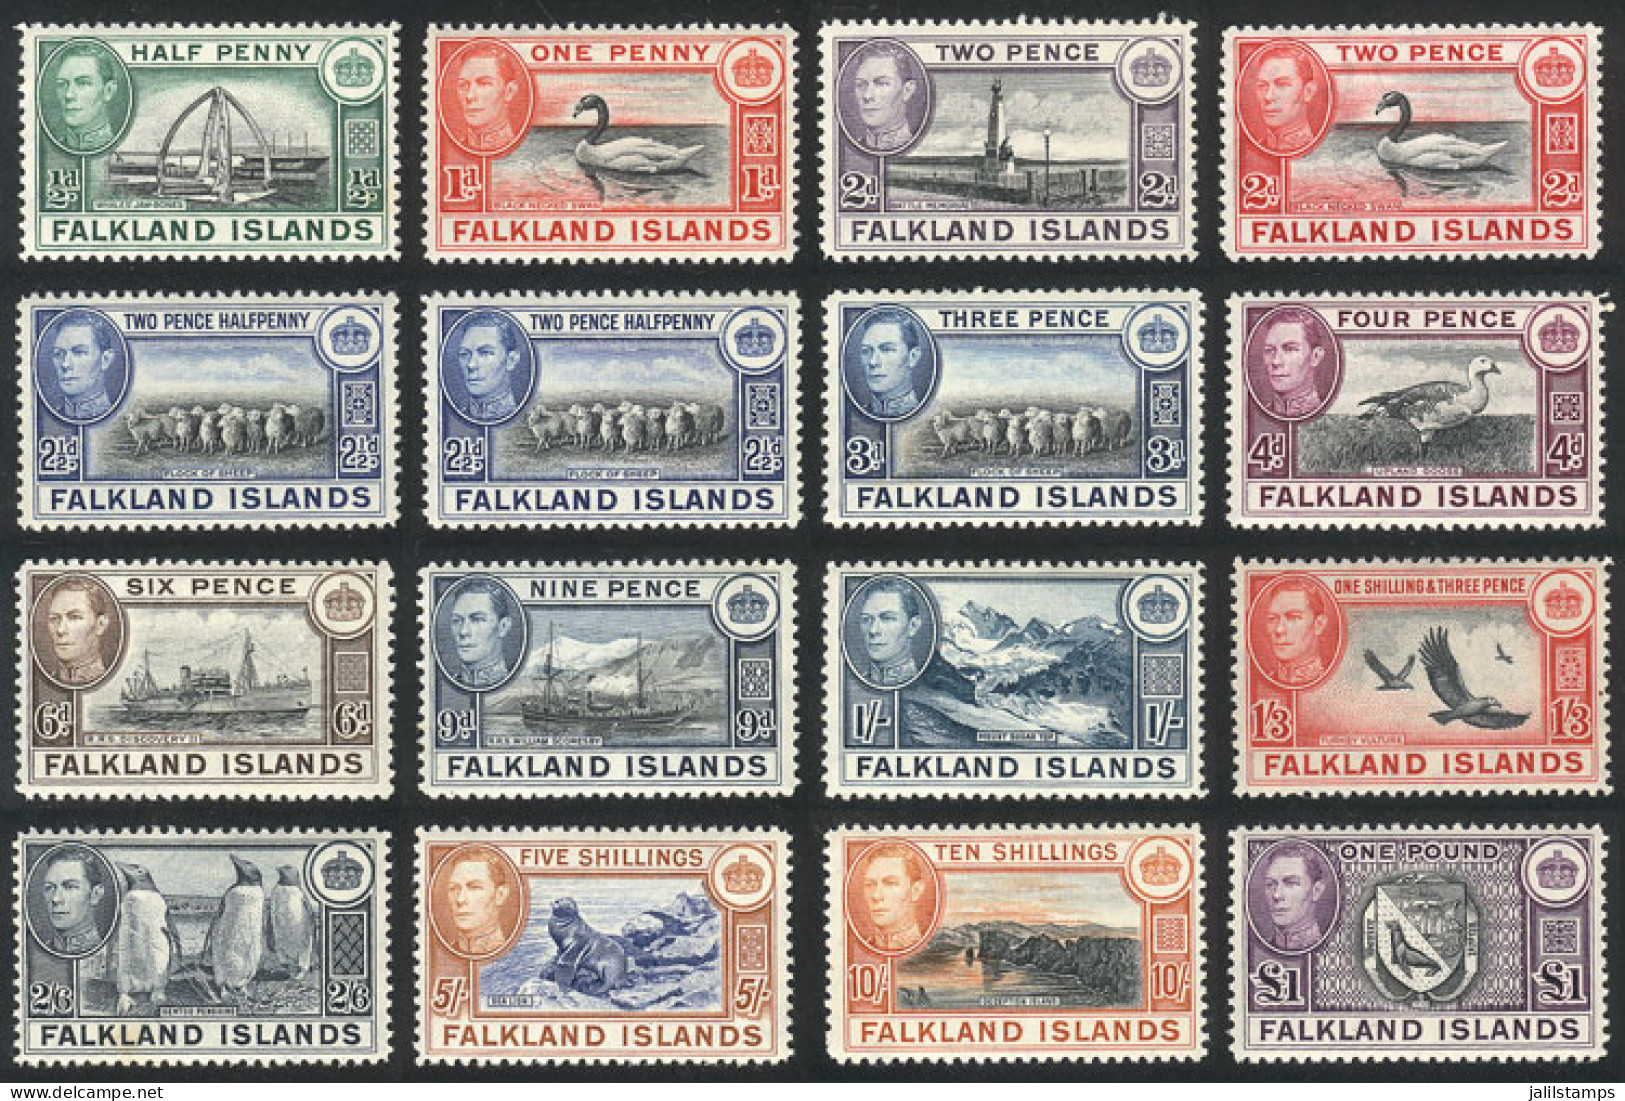 FALKLAND ISLANDS/MALVINAS: Sc.84/96 (without 85B), 1938/46, 15 Values Of The Set Of 16 (only The 1p. Violet Missing), MN - Falklandinseln